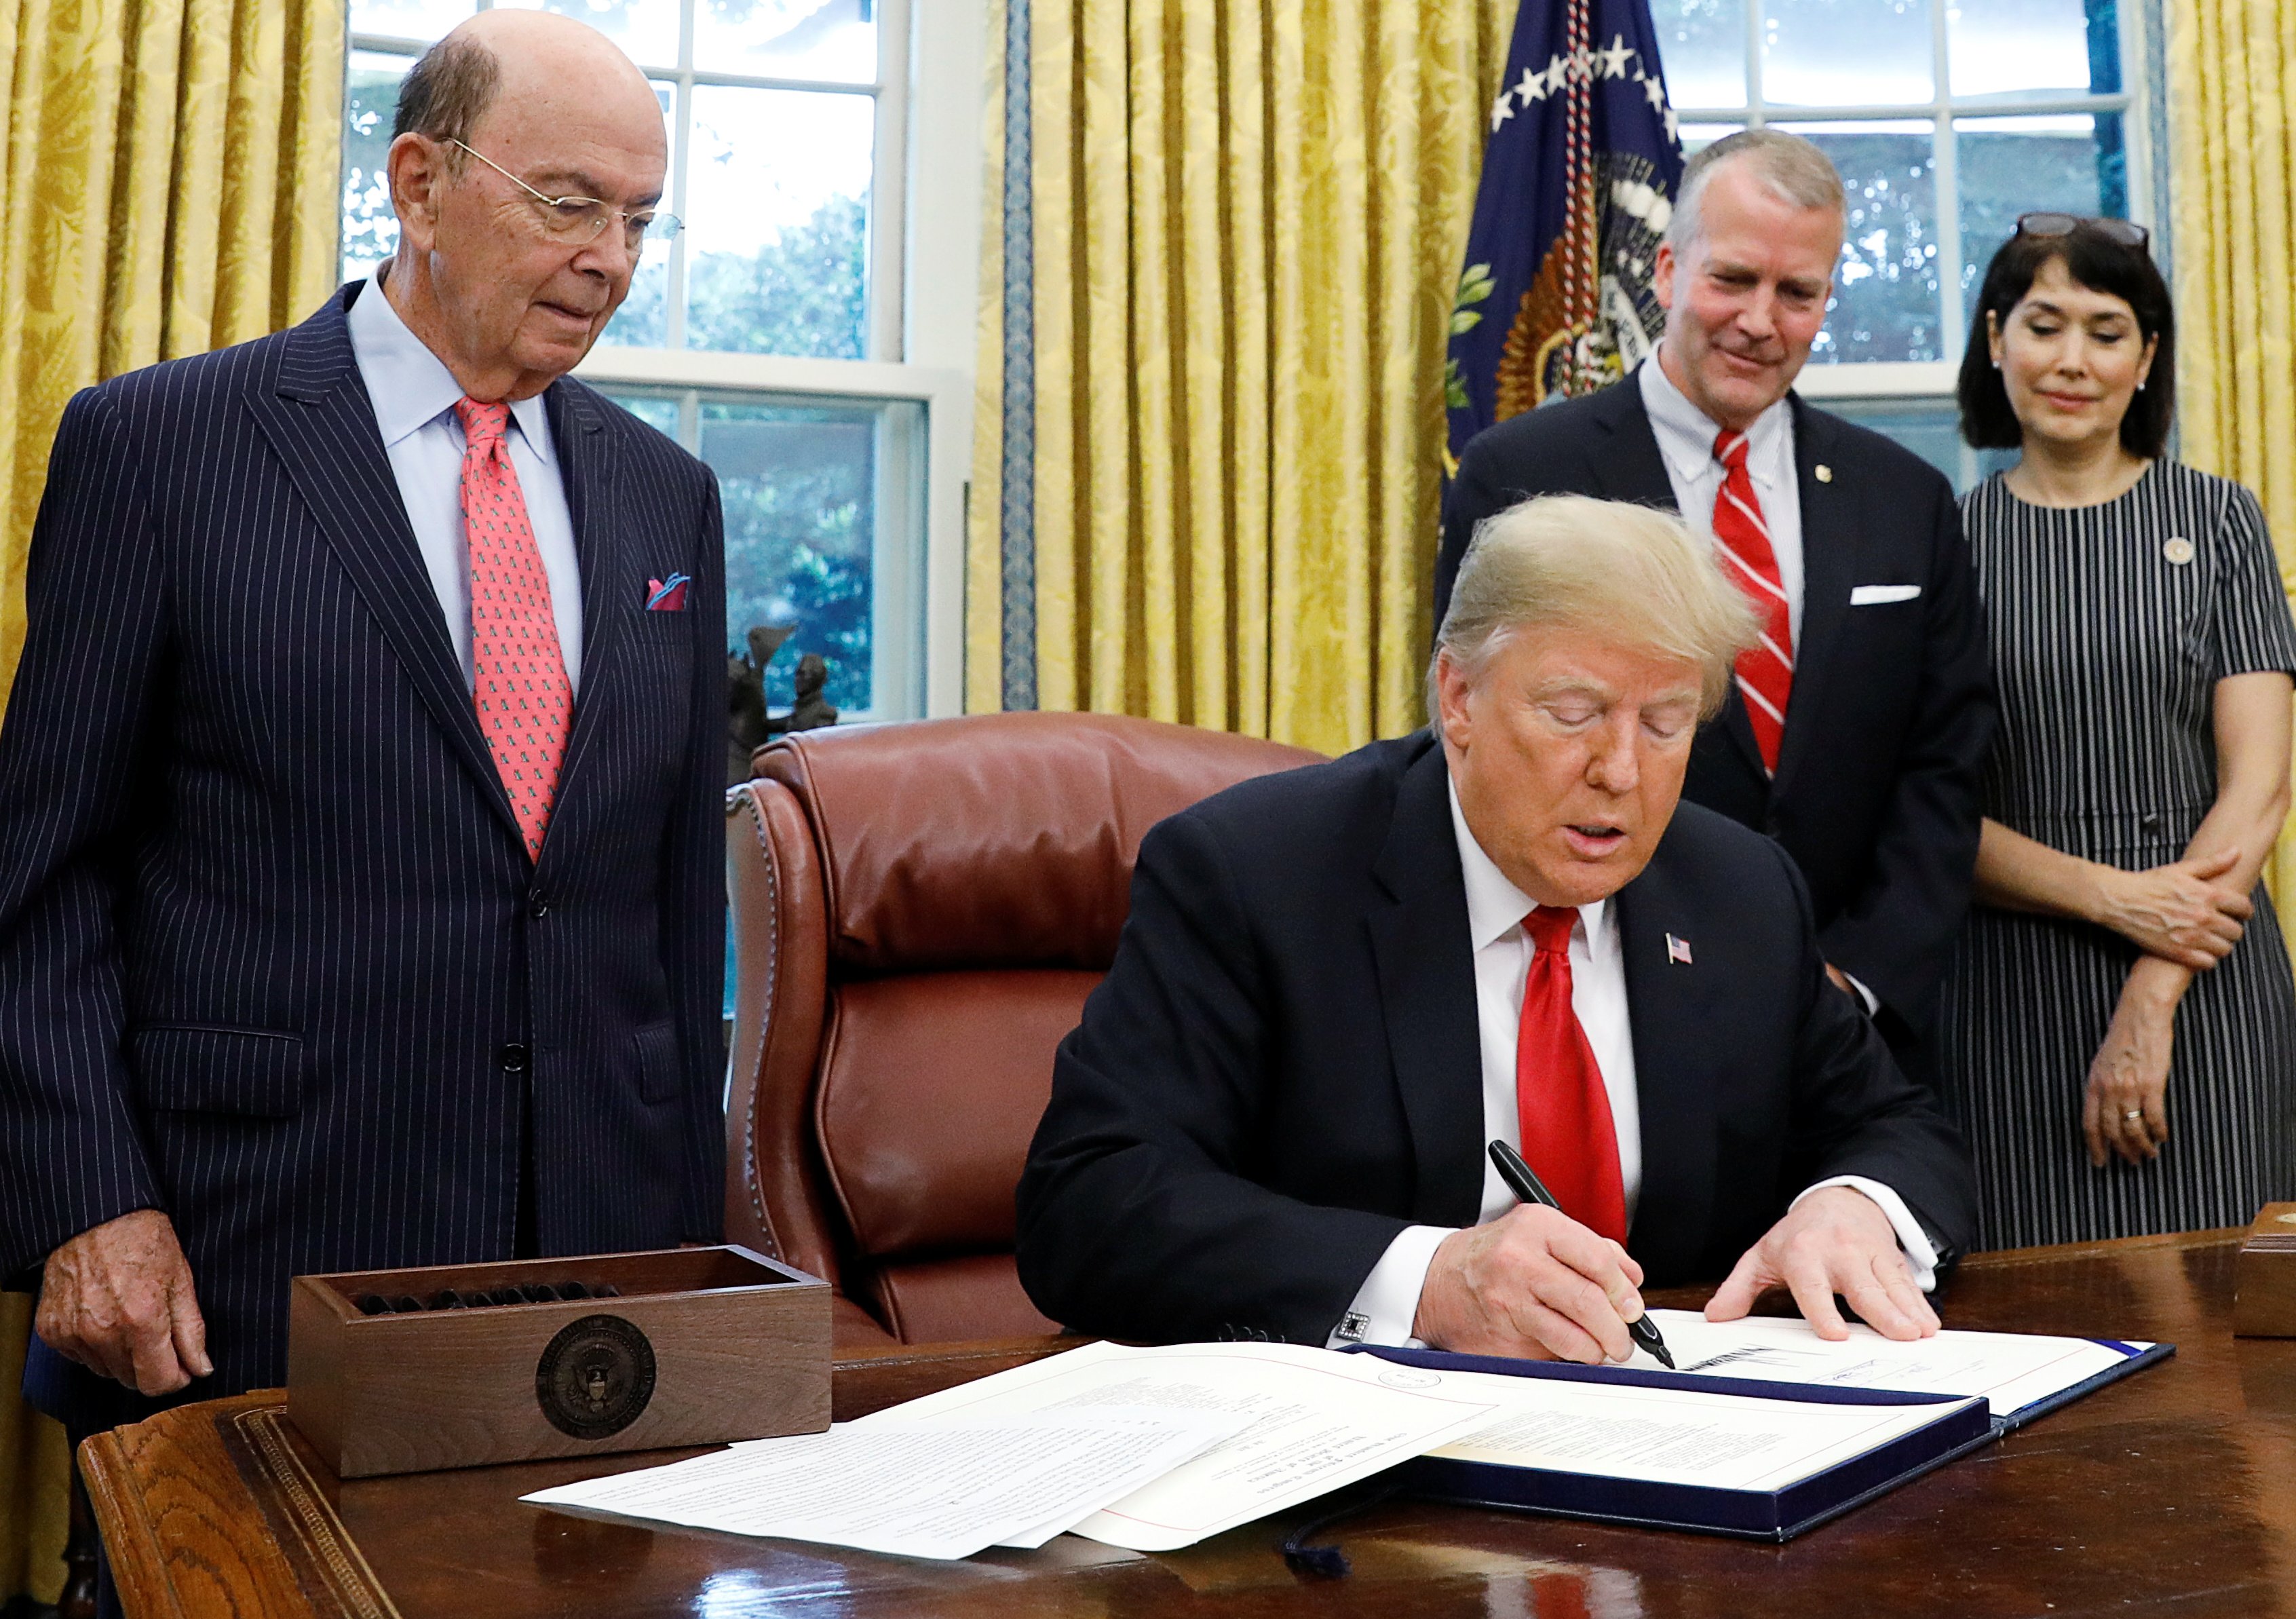 U.S. President Donald Trump participates in "Save Our Seas Act of 2018" signing ceremony at the White House in Washington